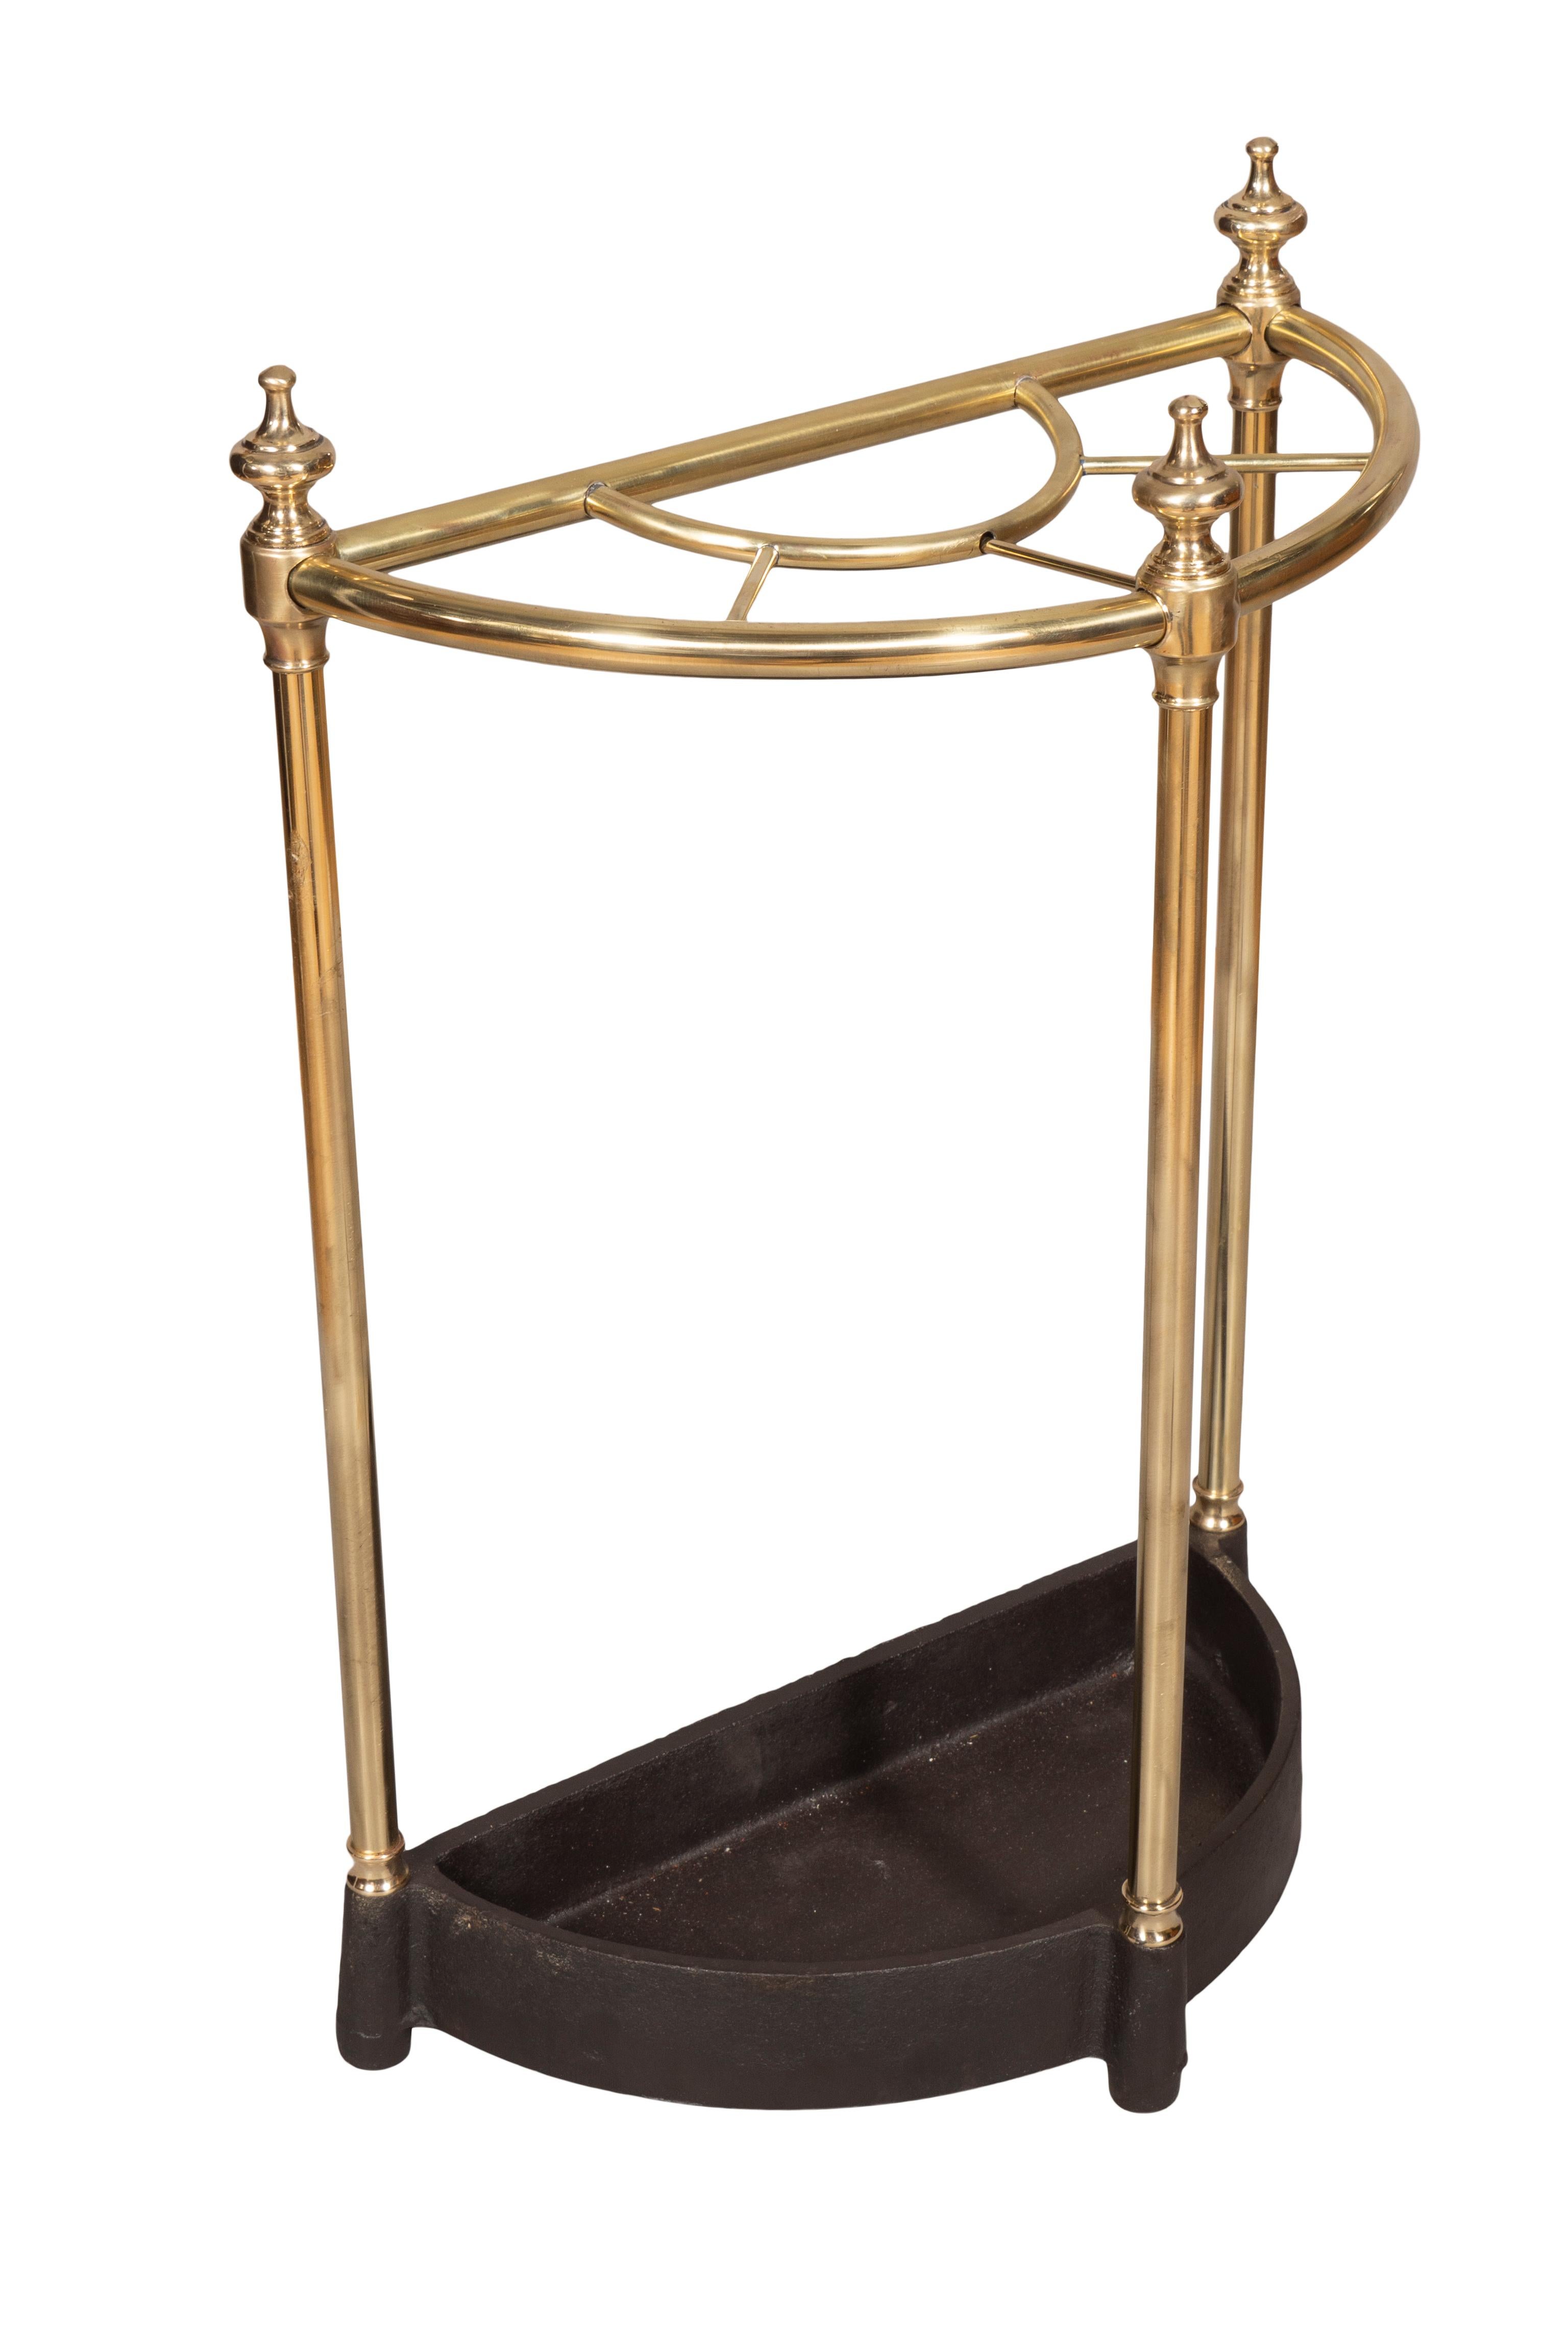 Simple form with cast iron base of a demilune form with a conforming brass frame with finials. Newly polished and cleaned.